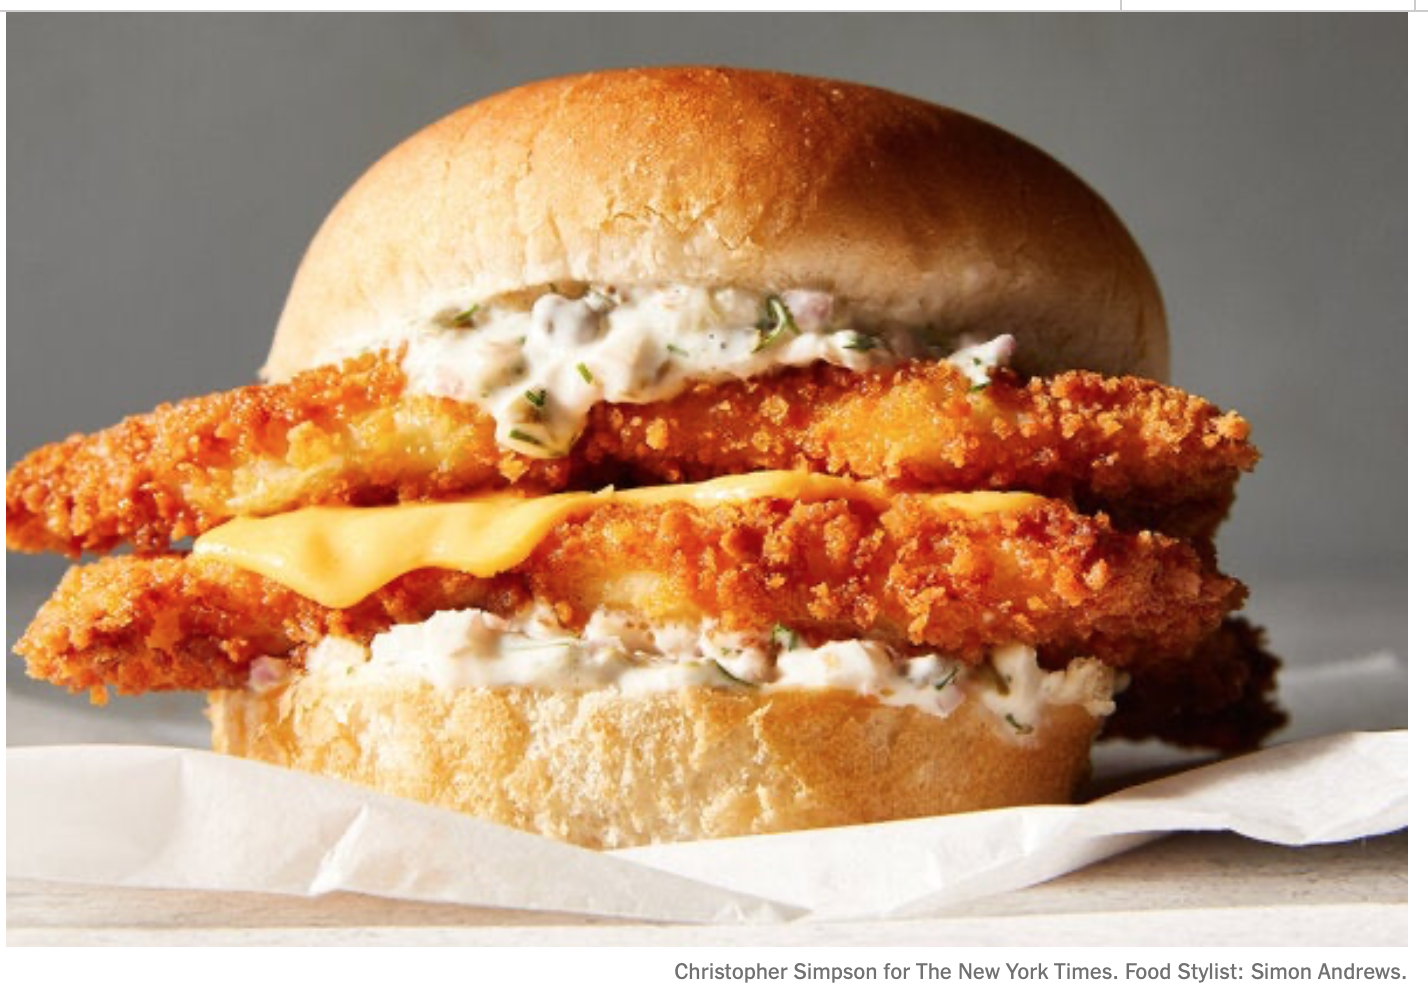 A wonderful photo of a fried fish sandwich by Christopher Simpson and Simon Andrews.